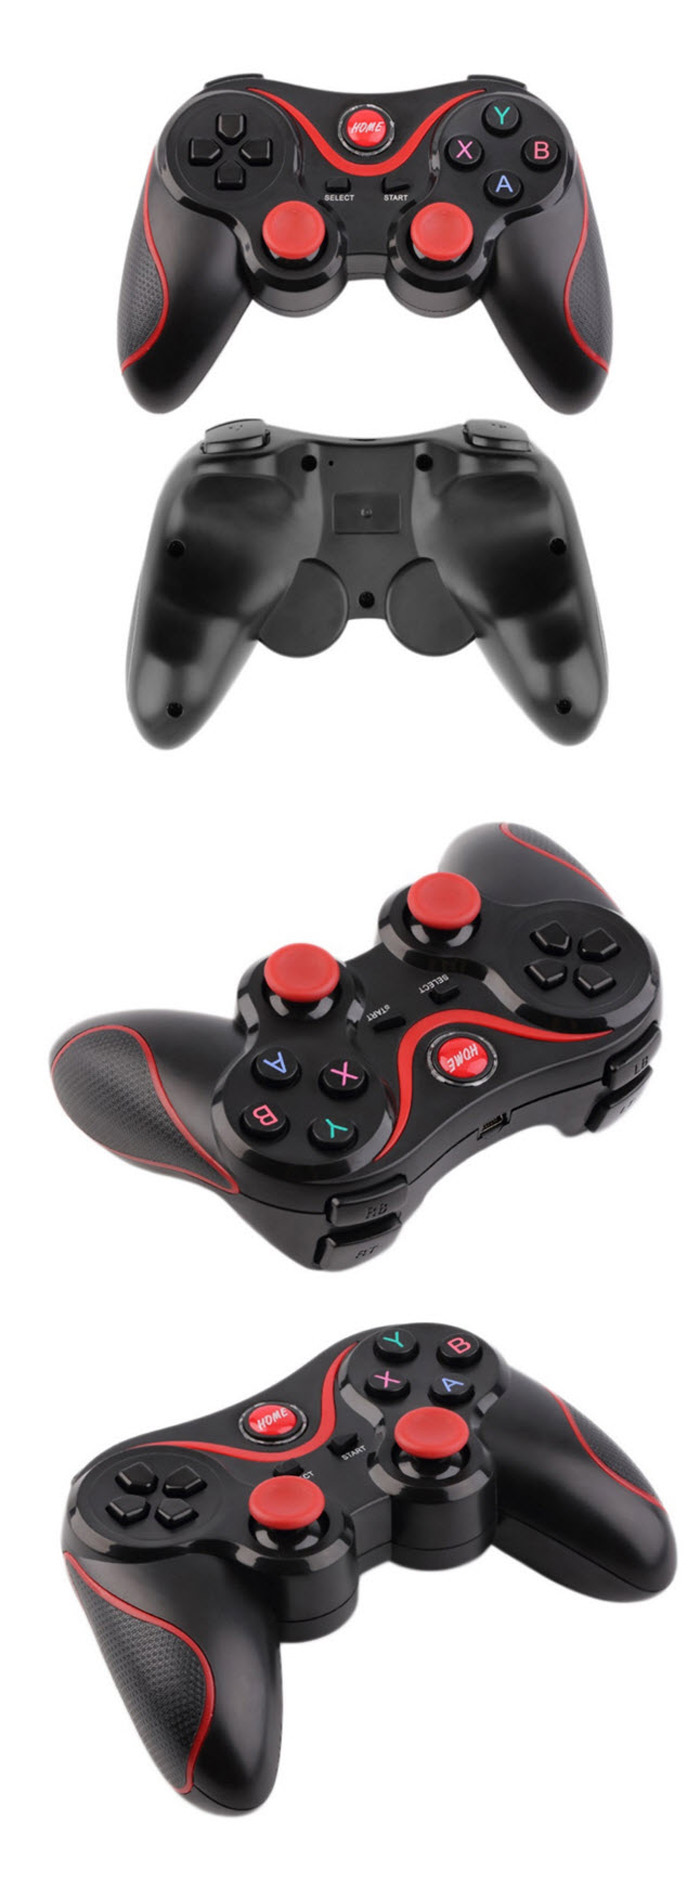 Smartphone Gamepad Controller Wireless Bluetooth Joystick for Android Phone/Pad/Tablet PC TV BOX